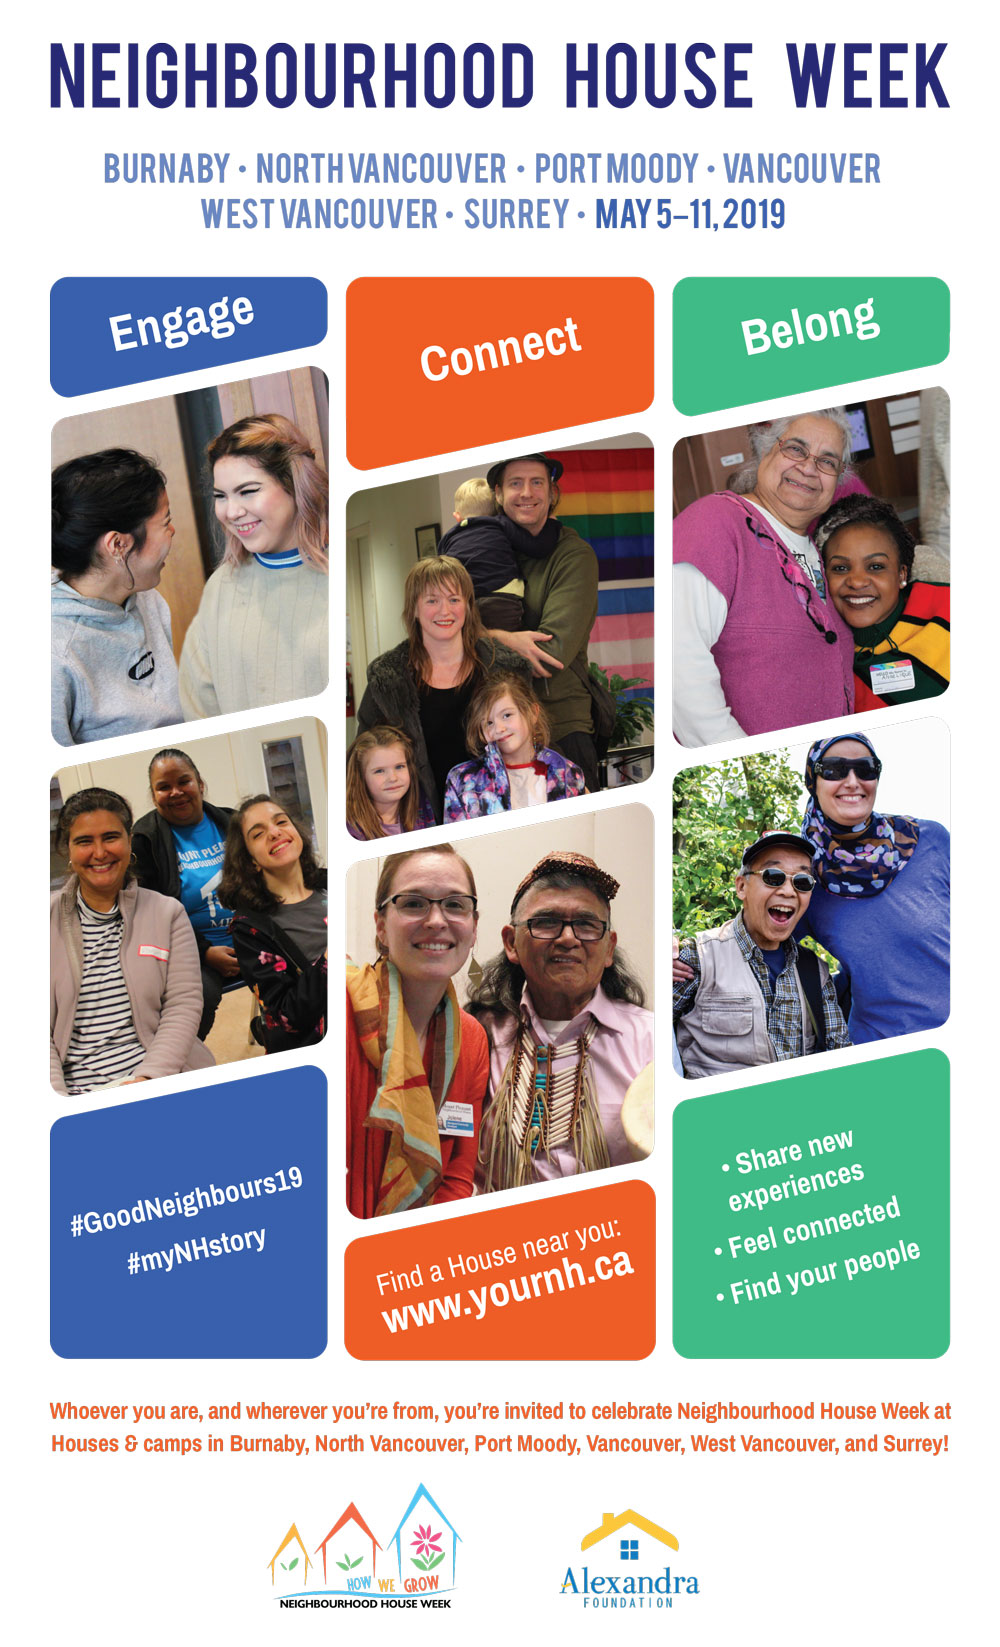 A poster showing images of people from many generations, abilities and cultural backgrounds, smiling and doing activities together.